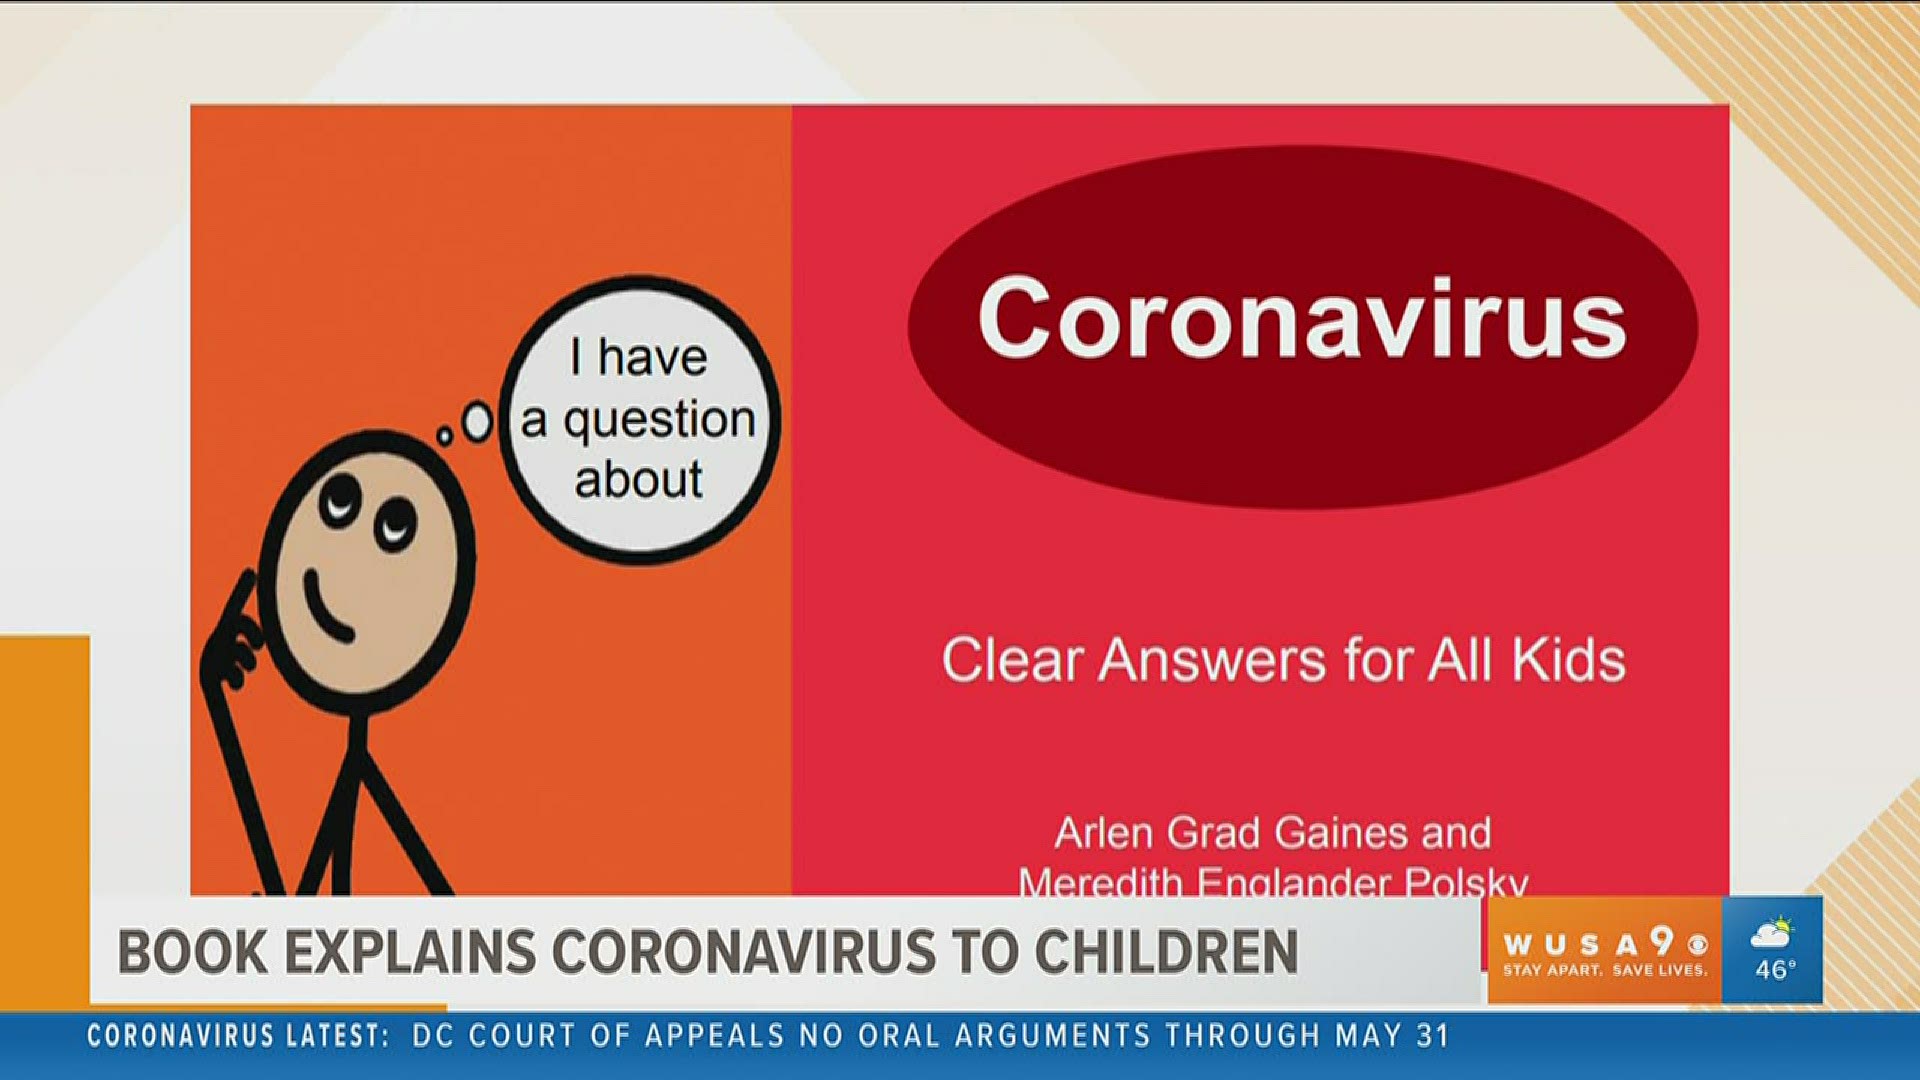 Explaining the coronavirus to children is tough. Meredith Englander Polsky and Arlen Grad Gaines wrote a free, downloadable book to help kids understand this time.